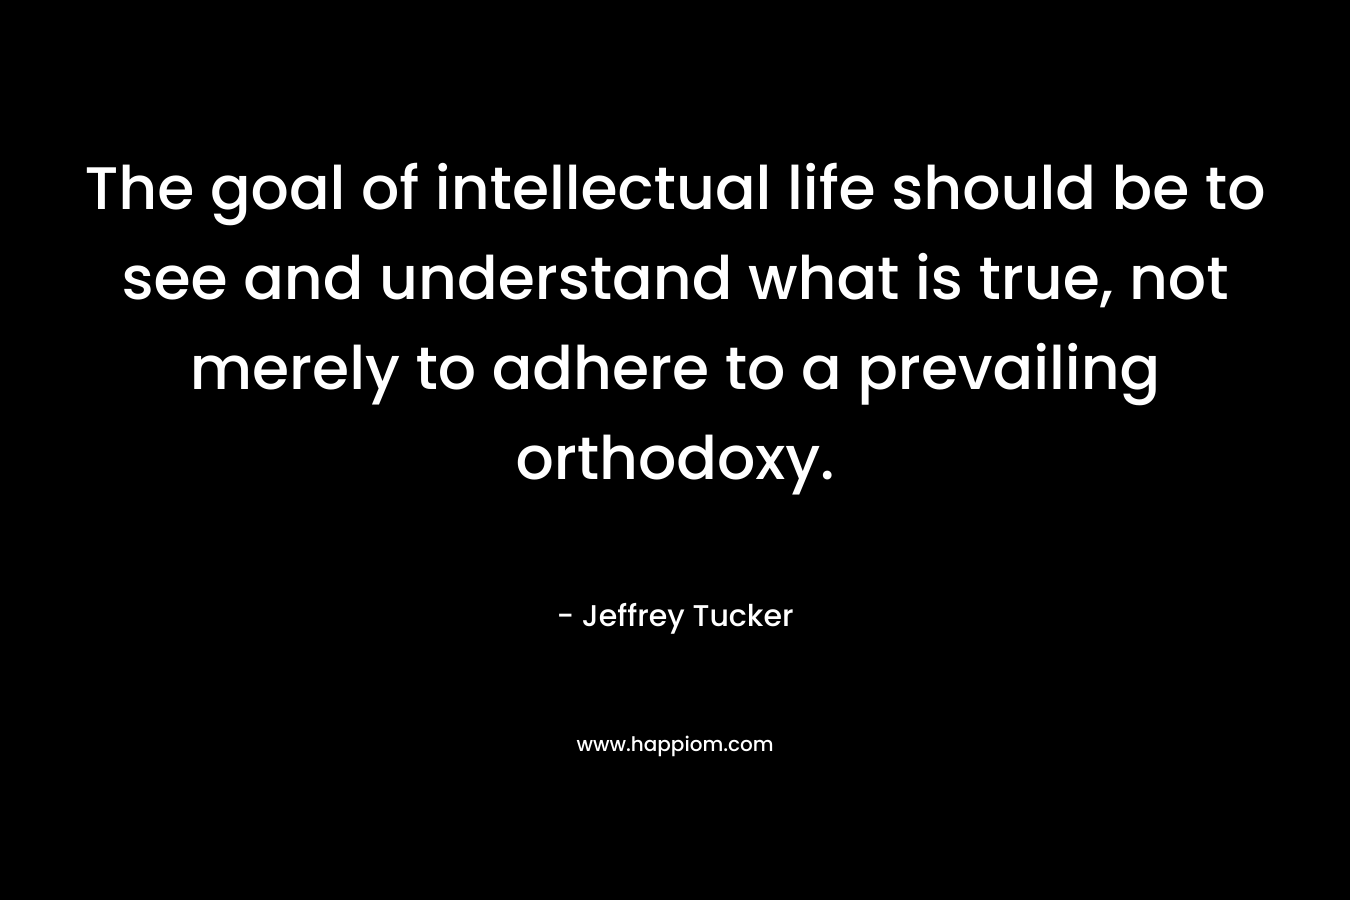 The goal of intellectual life should be to see and understand what is true, not merely to adhere to a prevailing orthodoxy.